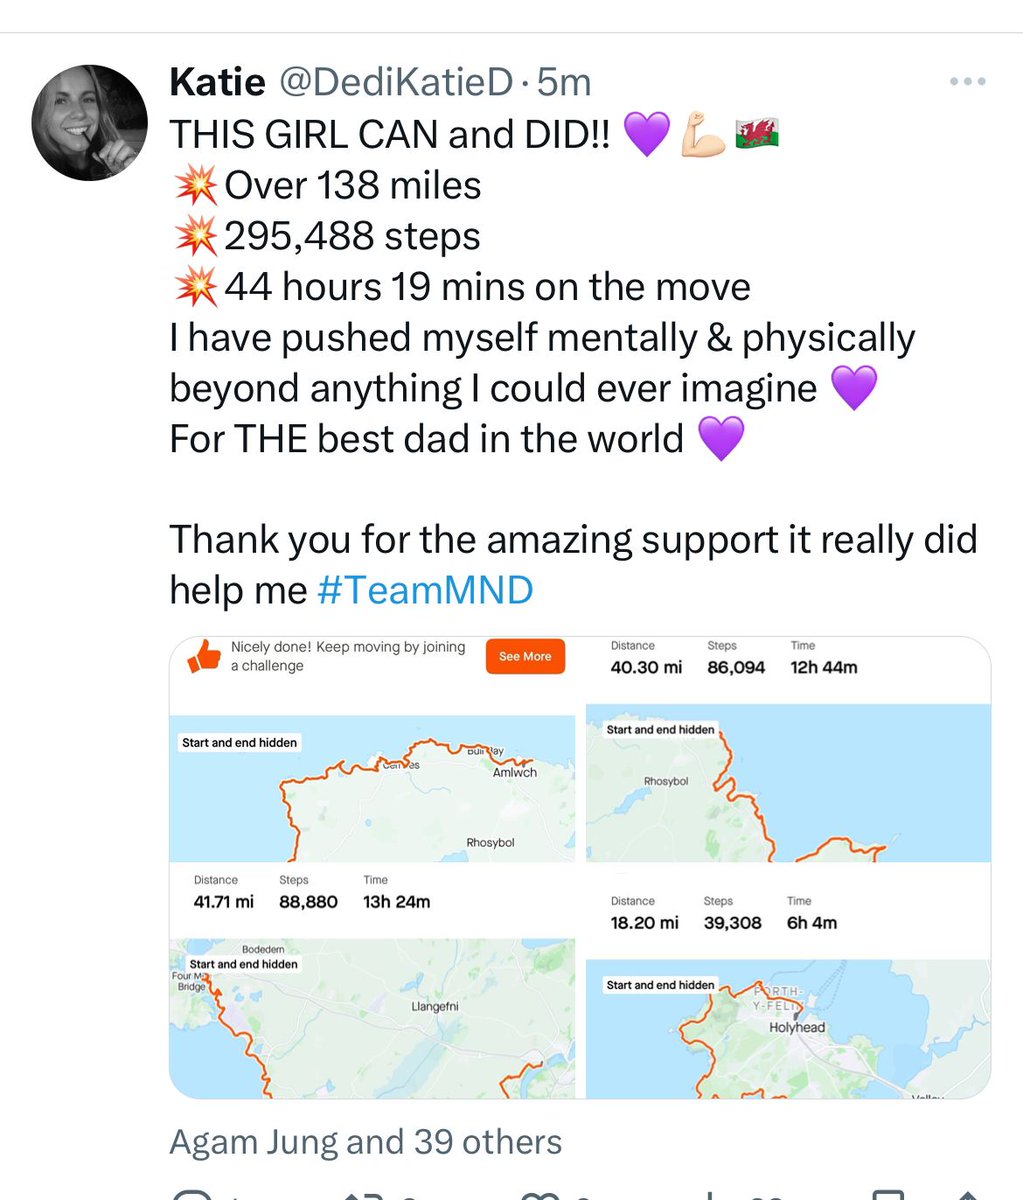 No apologies for my second proud mum post today. She did it! The Anglesey Coast Path. 138 miles in three & a half days. Thank you so much to everyone who's supported @DediKatieD with warm words, encouragement & generous donations to a cause so dear to our hearts @LDShospcharity